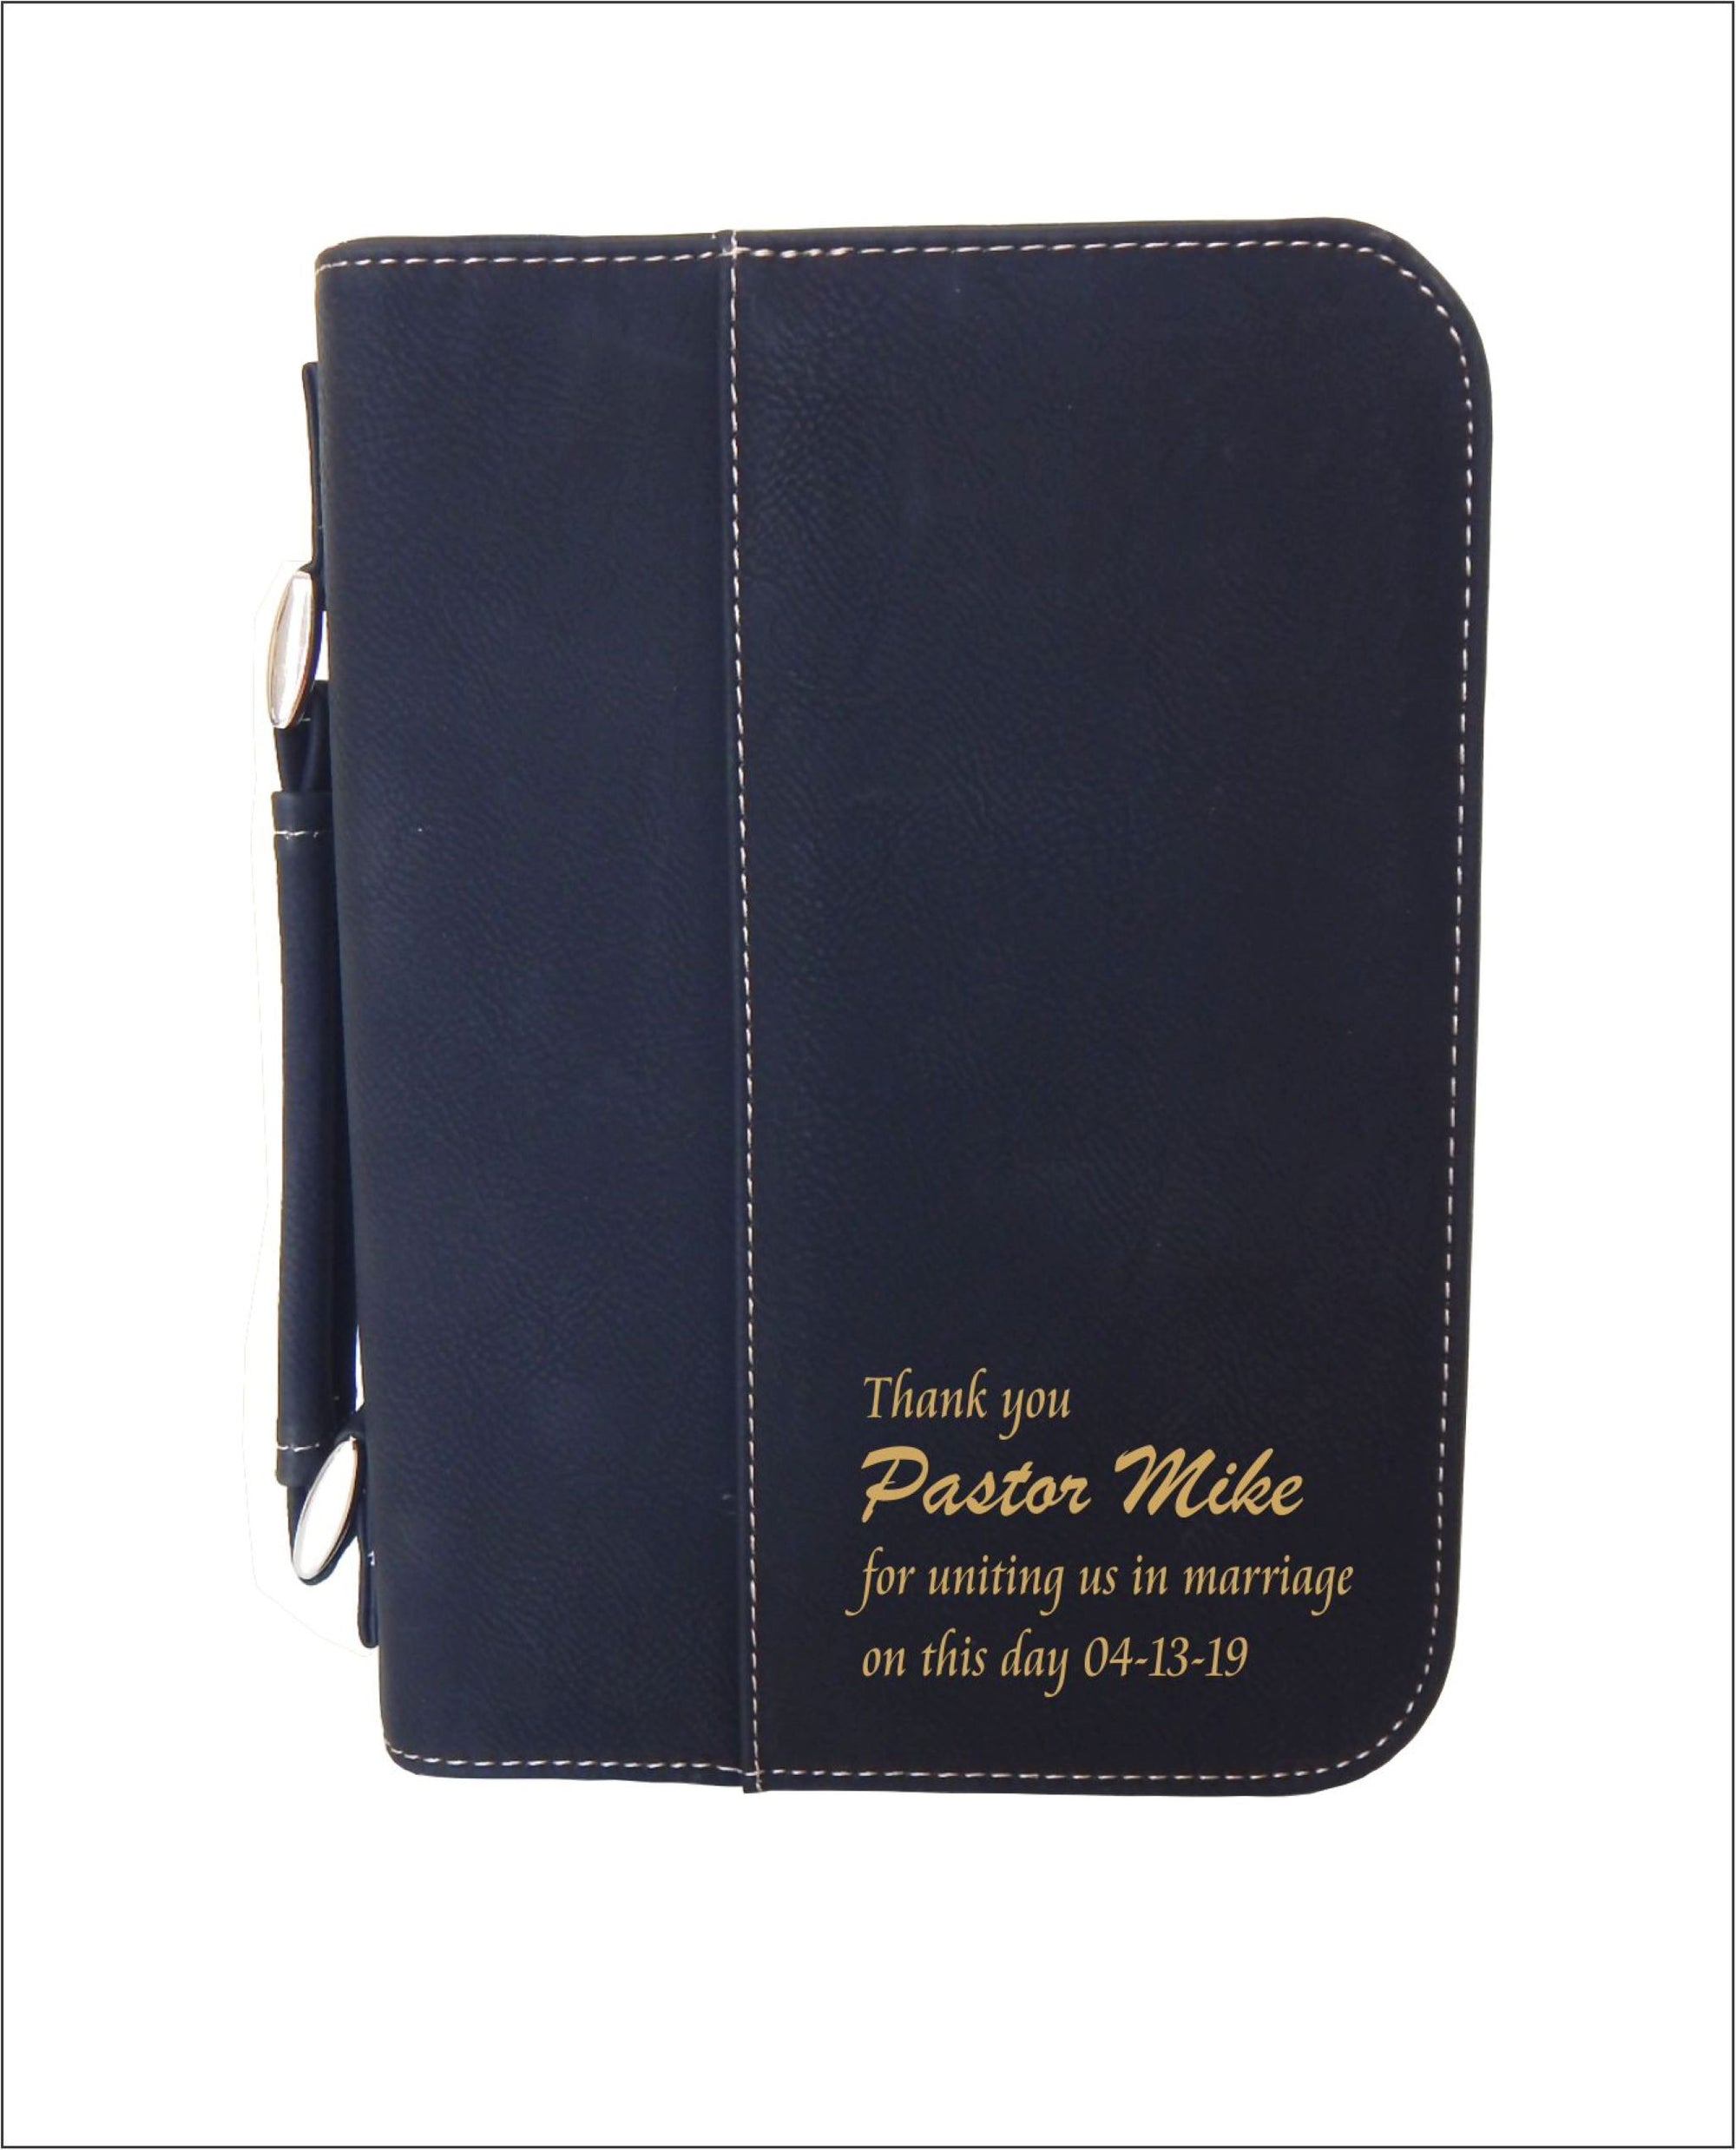 Wedding Gift for Pastor | Officiant Gifts | Personalized Priest Leather Bible Cover